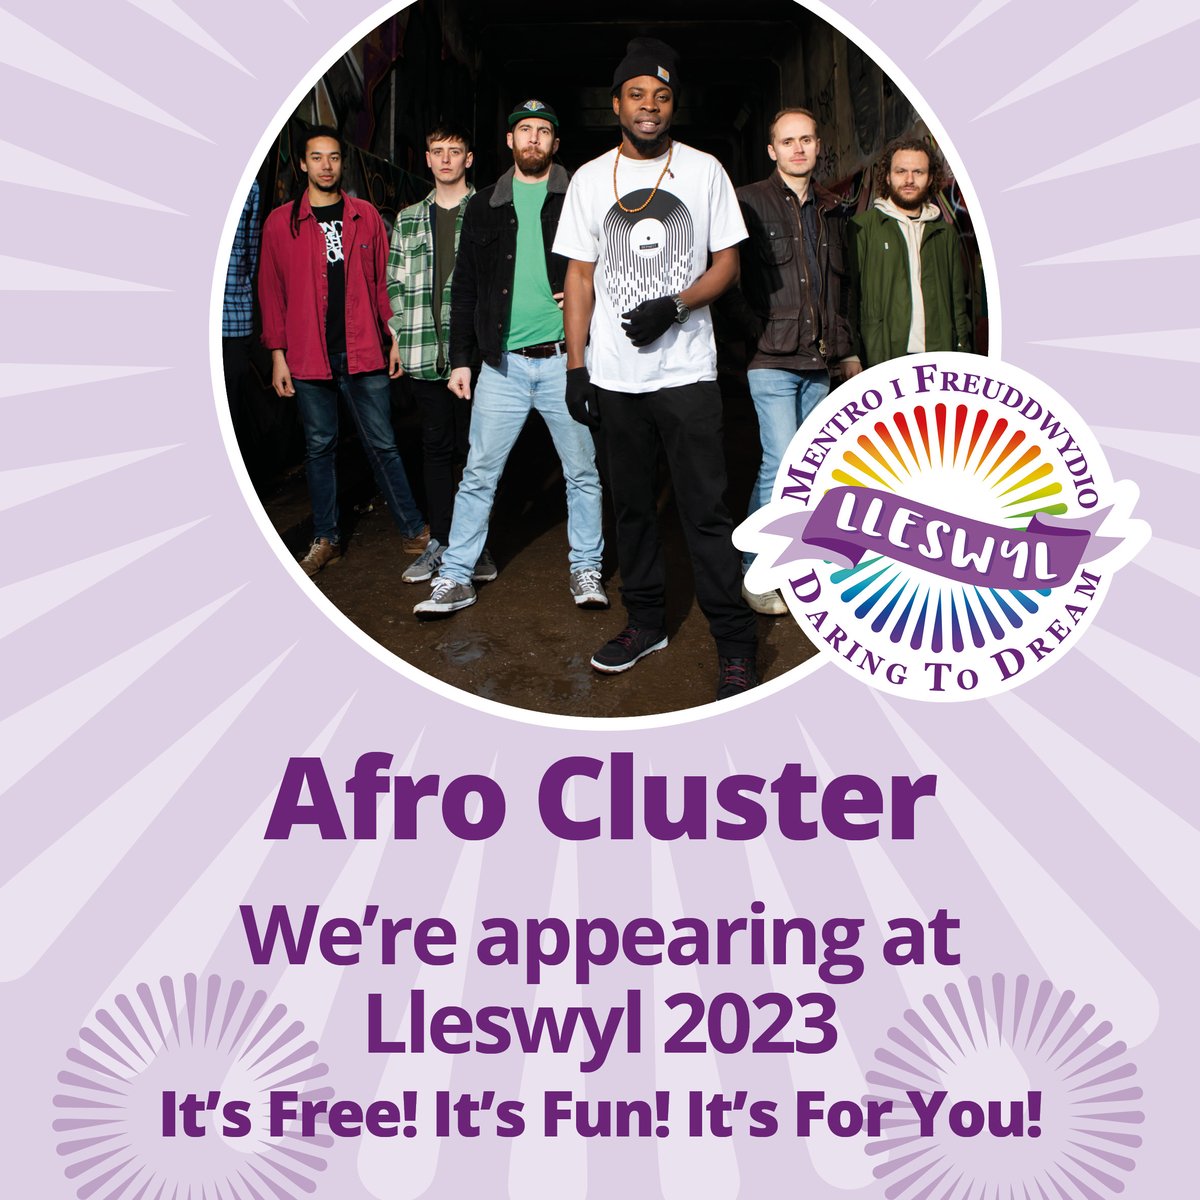 Returning by popular demand to Lleswyl 2023 is @afrocluster and @Skunkadelicuk - fantastic news to have you all in our line up once again! Diolch! Lleswyl 2023 is 📆 Friday, 17th February 🕖 7.00pm 🎟 Register here: lleswyl2023.eventbrite.co.uk